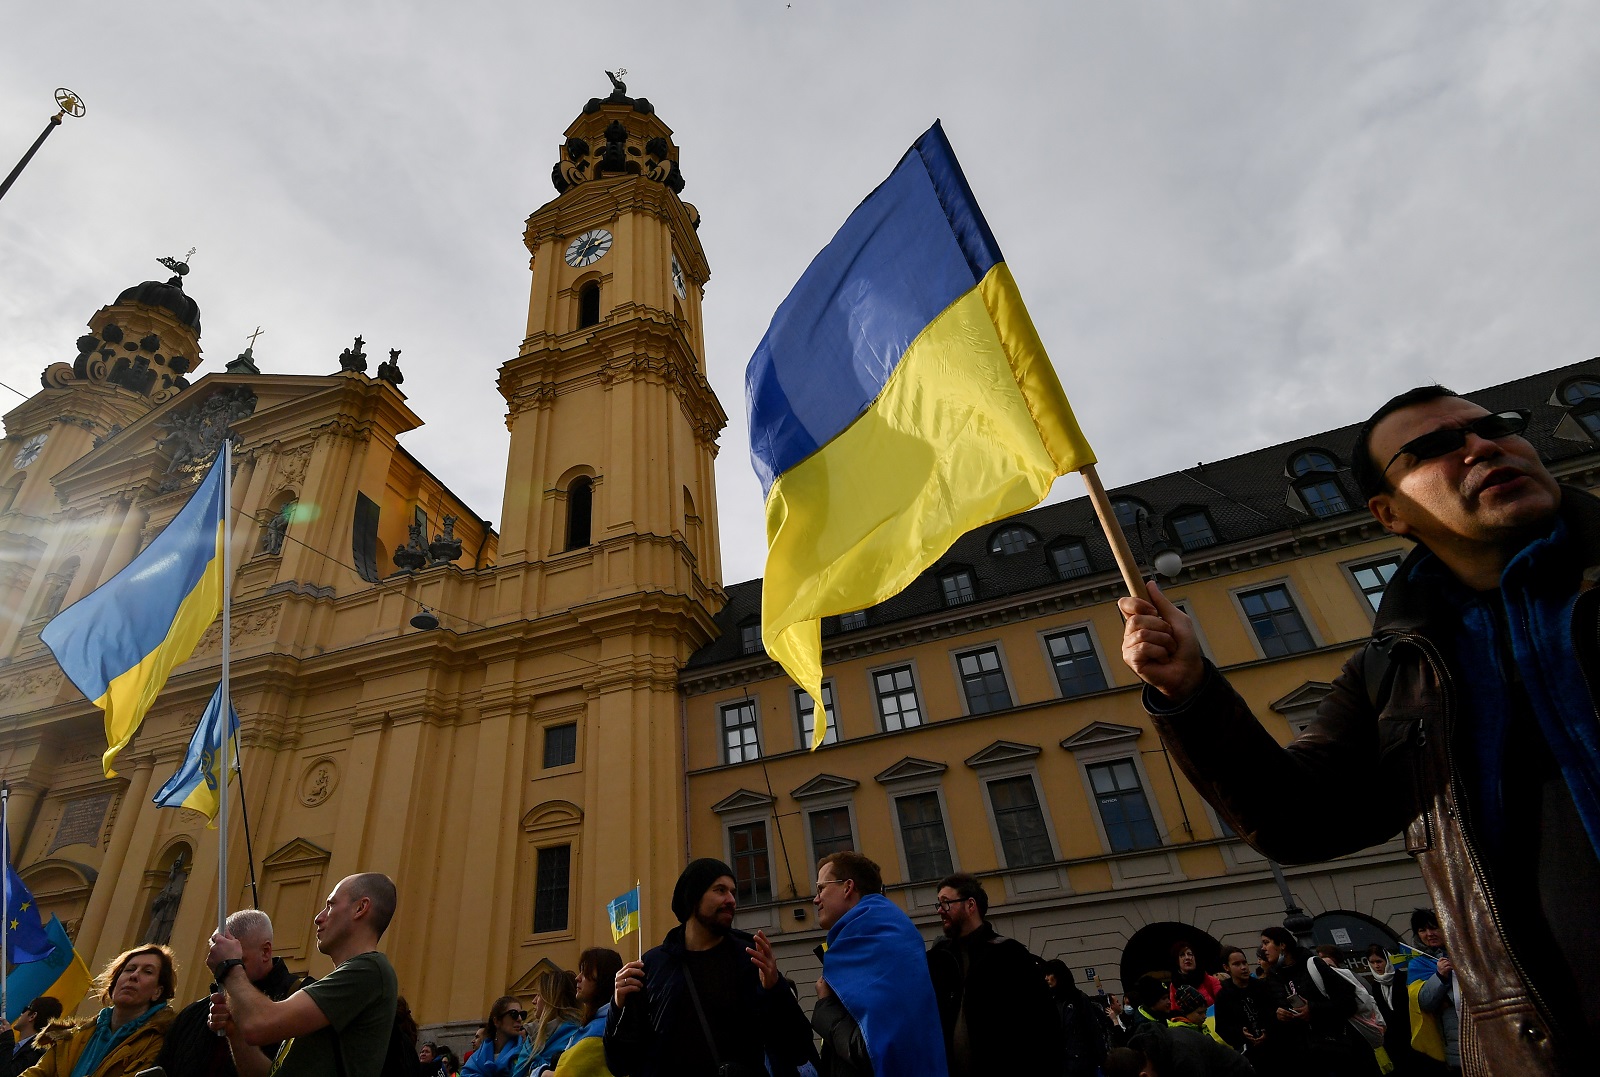 epa10475078 A woman holds Ukraine's flag during a rally supporting Ukraine during the 59th Munich Security Conference (MSC) in Munich, Germany, 18 February 2023. More than 500 high-level international decision-makers meet at the 59th Munich Security Conference in Munich during their annual meeting from 17 to 19 February 2023 to discuss global security issues.  EPA/ANNA SZILAGYI